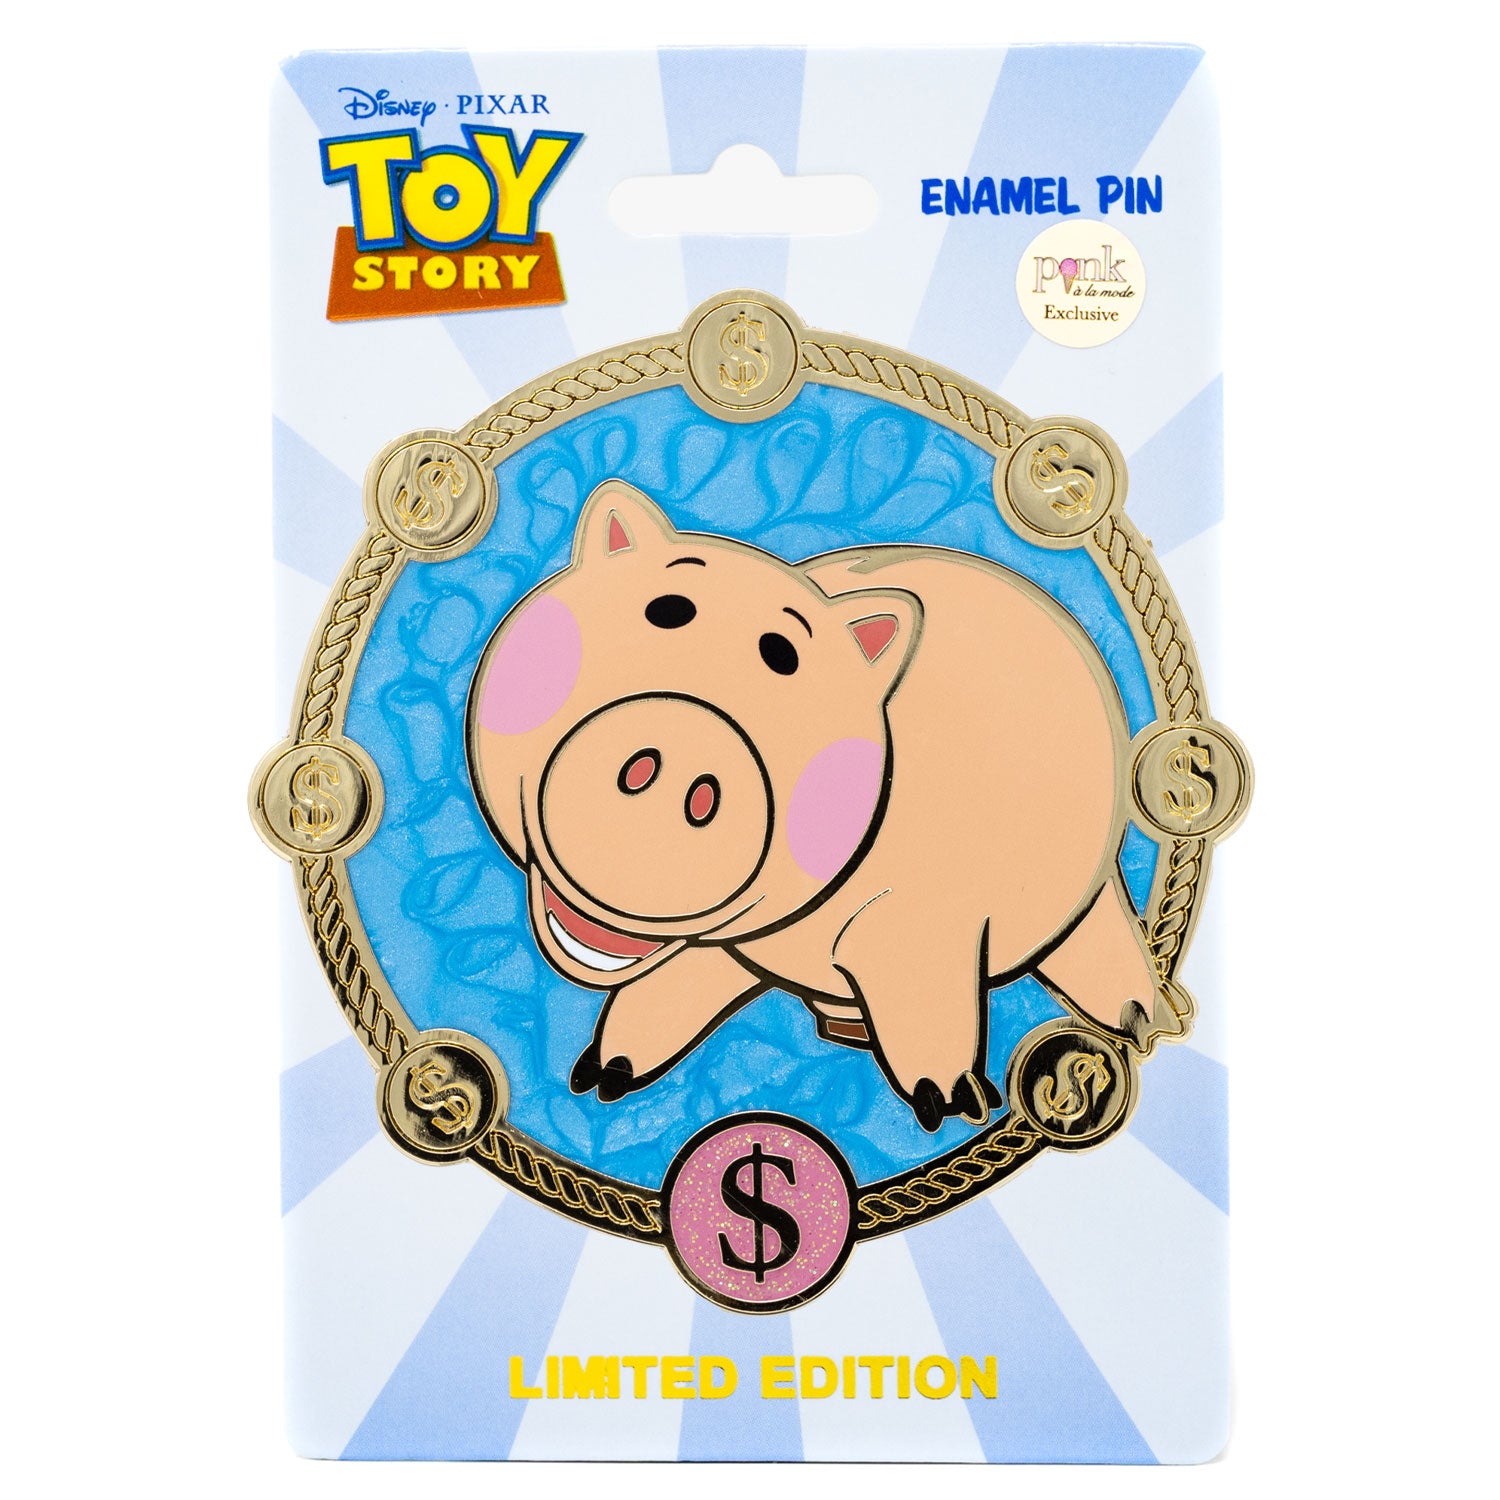 toy story collection hamm